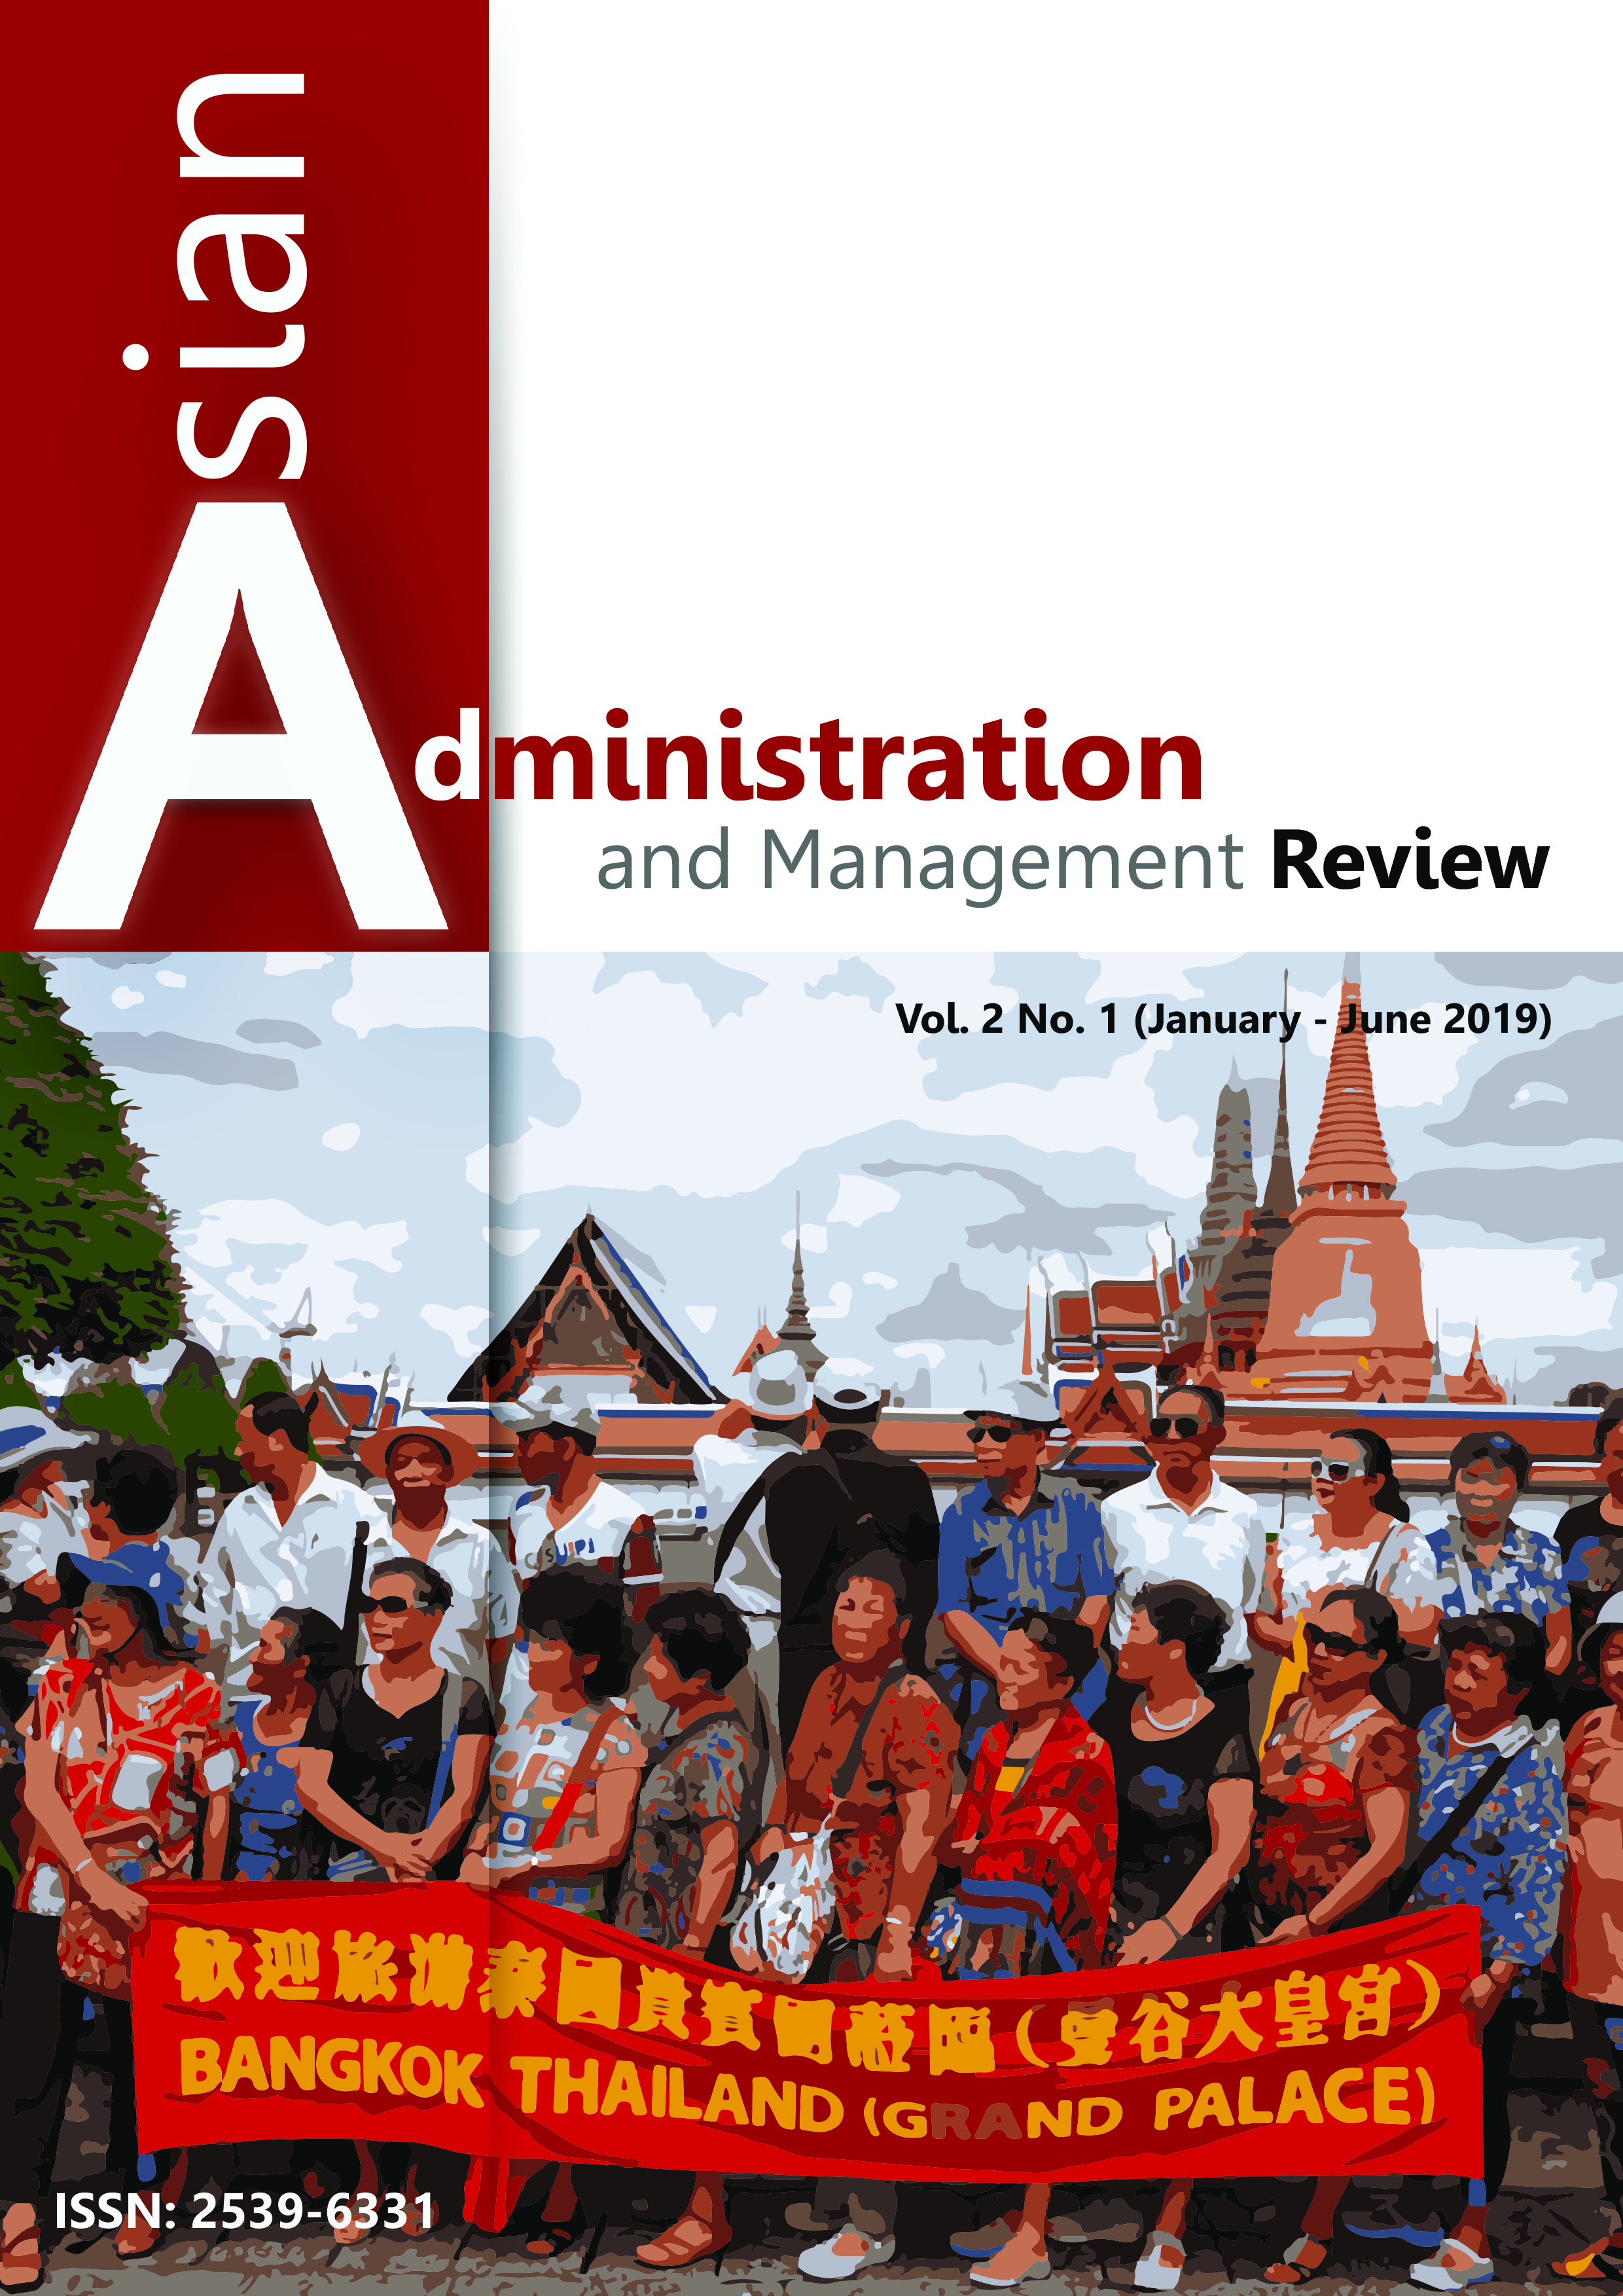 					View Vol. 2 No. 1 (2019): Asian Administration and Management Review
				